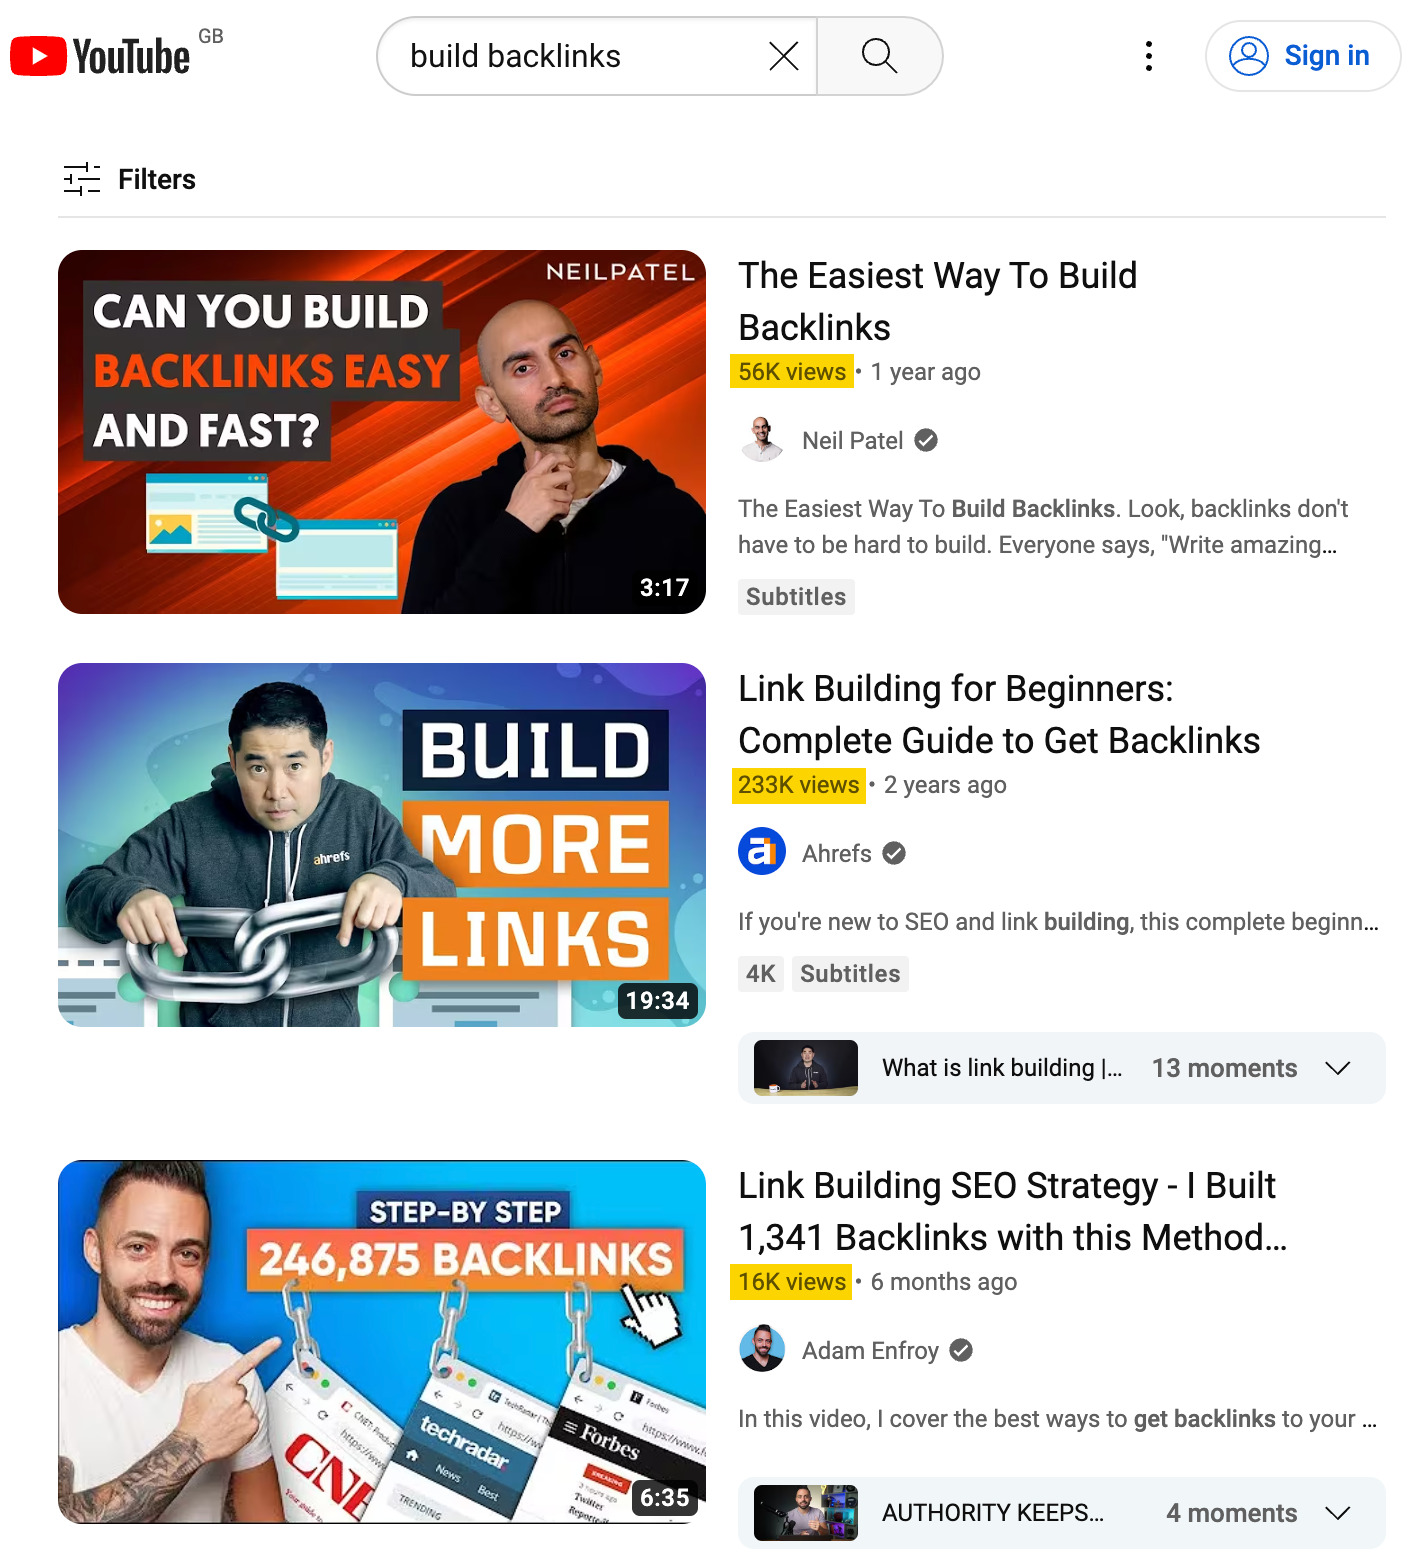 Top results for "build backlinks" on YouTube 